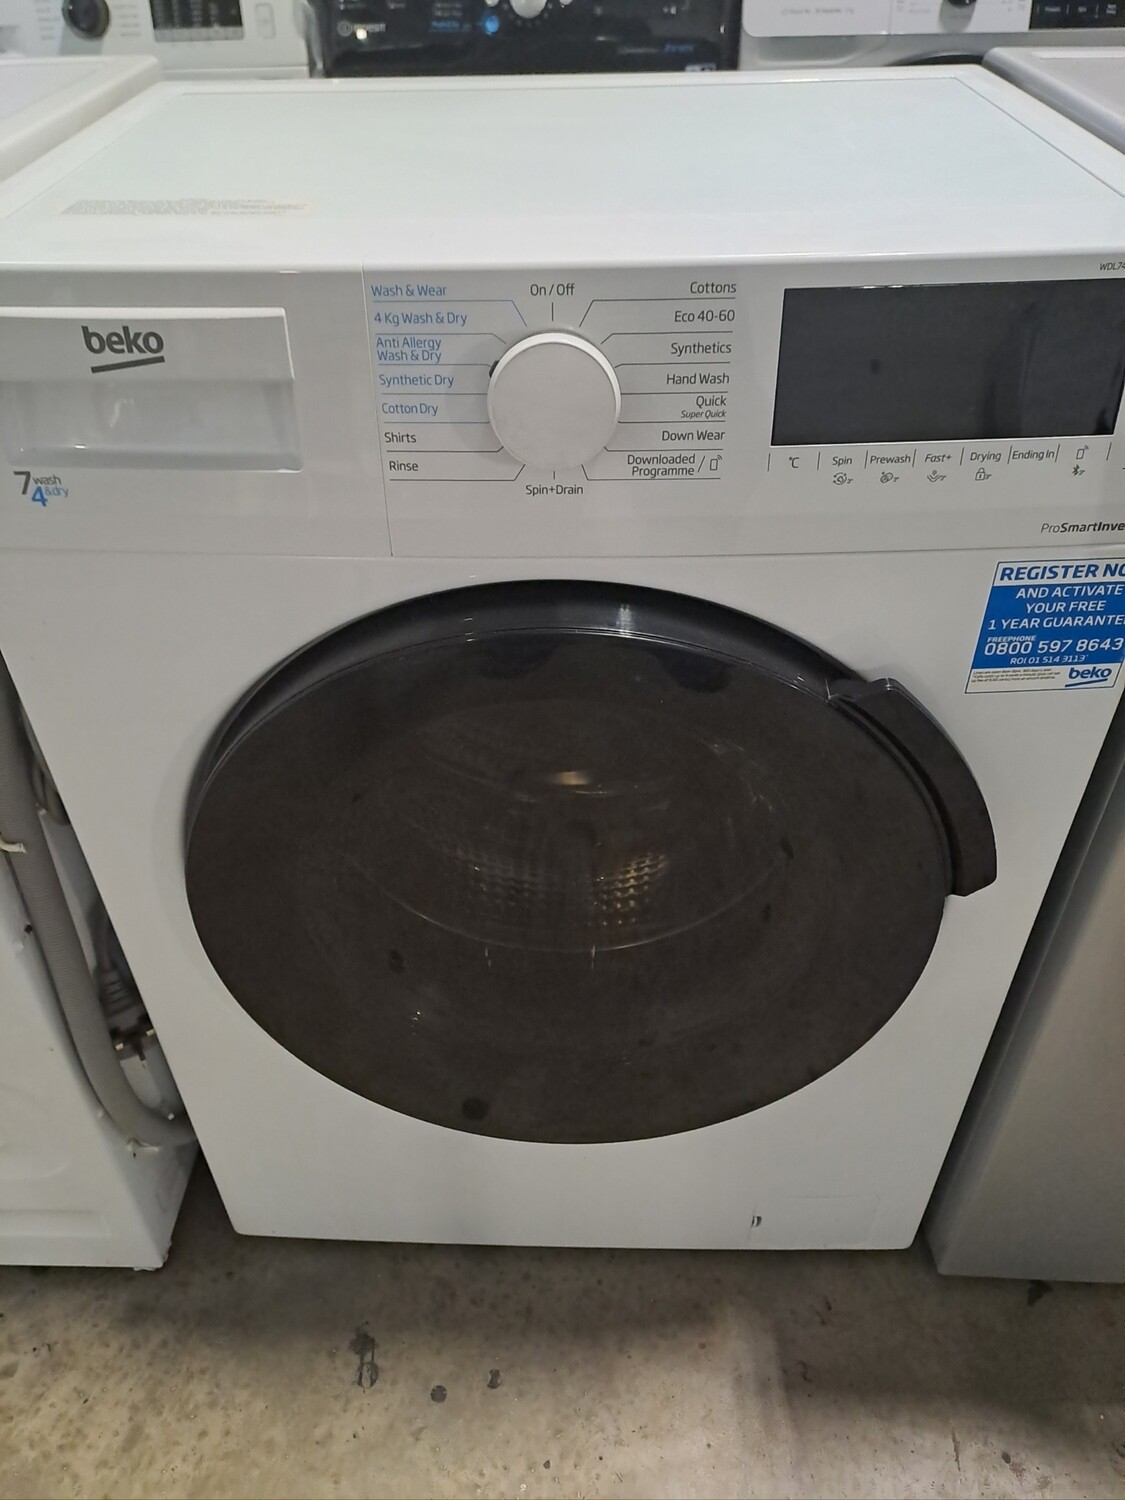 Beko WDL742431W 7+4kg Load 1400 Spin Washer Dryer - White - Refurbished - 6 Month Guarantee. This item is located in our Whitby Road Shop 